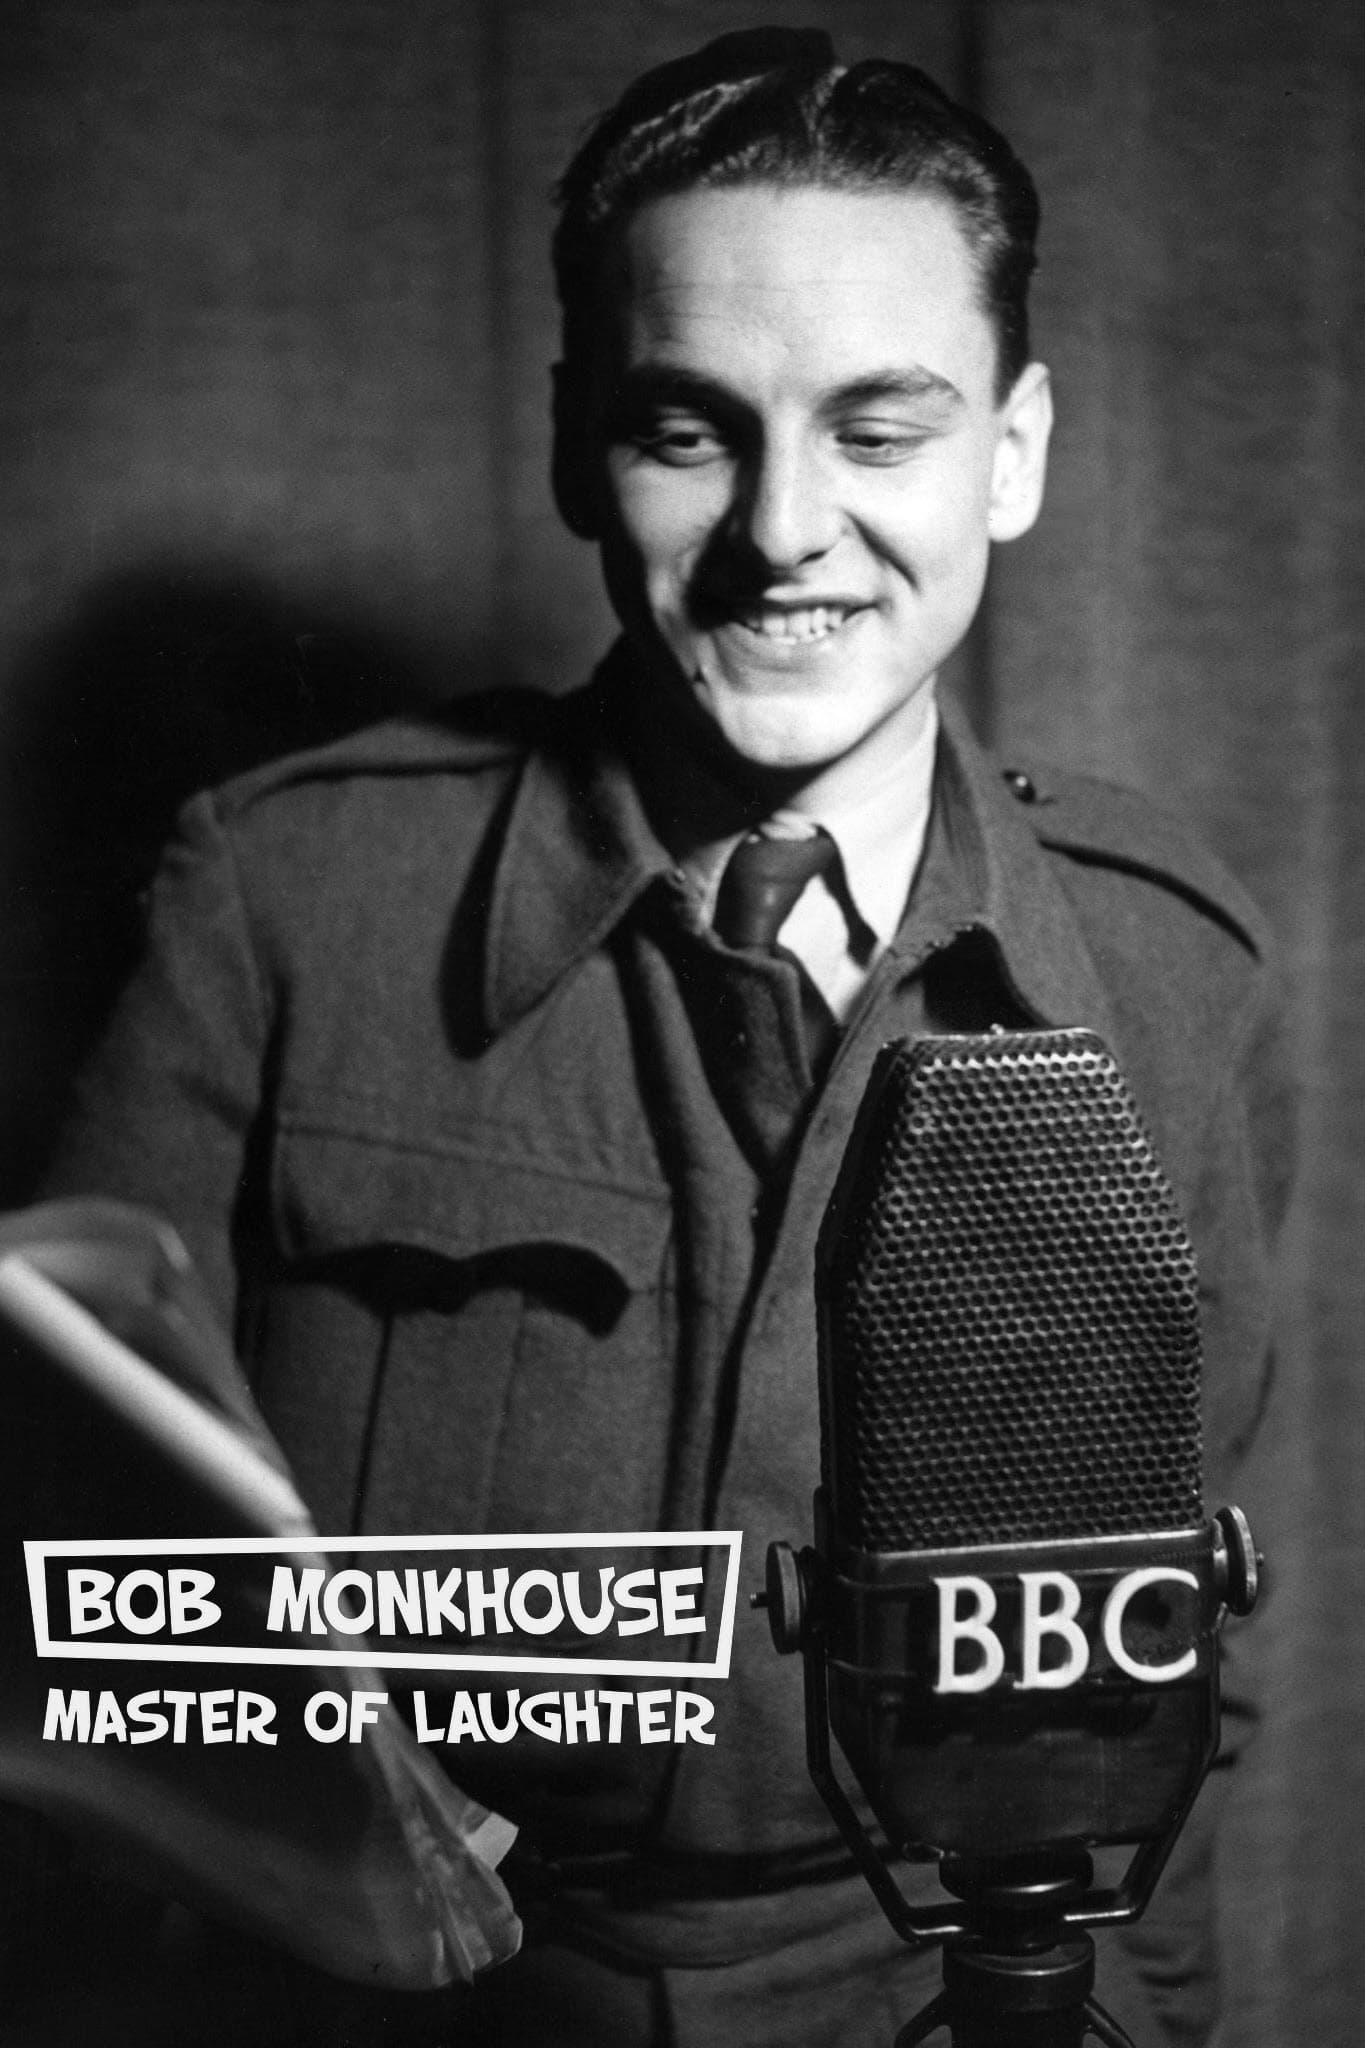 Bob Monkhouse: Master of Laughter